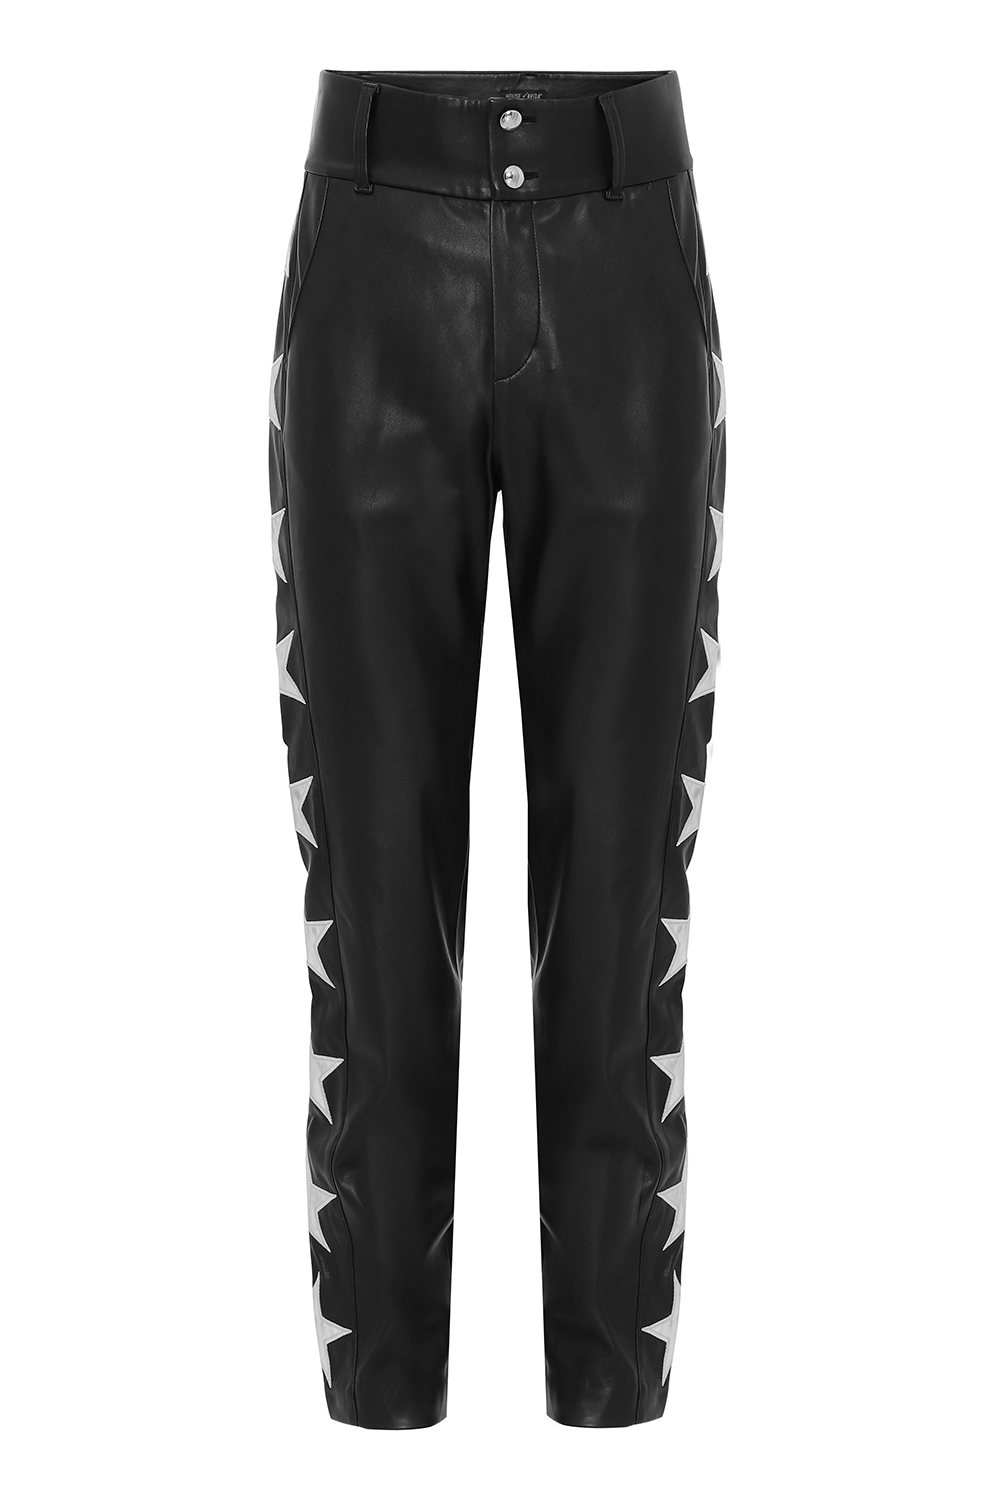 BLACK LEATHER PANTS WITH WHITE STARS TO MEN ⋆ House of Avida